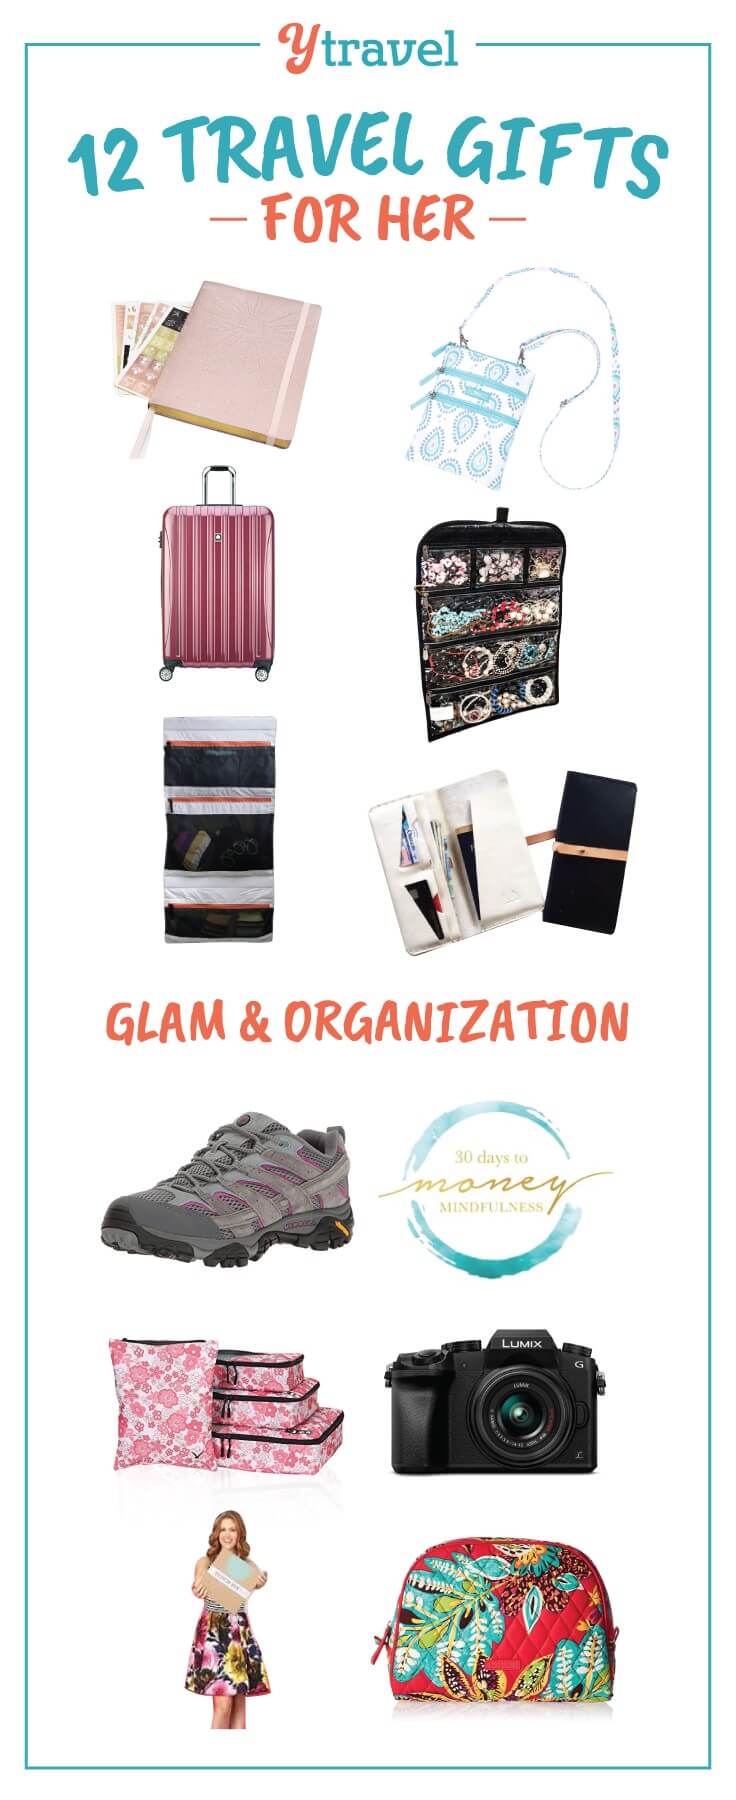 Travel gifts for her. Looking for the best travel gifts for her this holiday season? I share my favorite travel products and services that offer the woman you love glam and travel organization. Great travel gift ideas ahead!